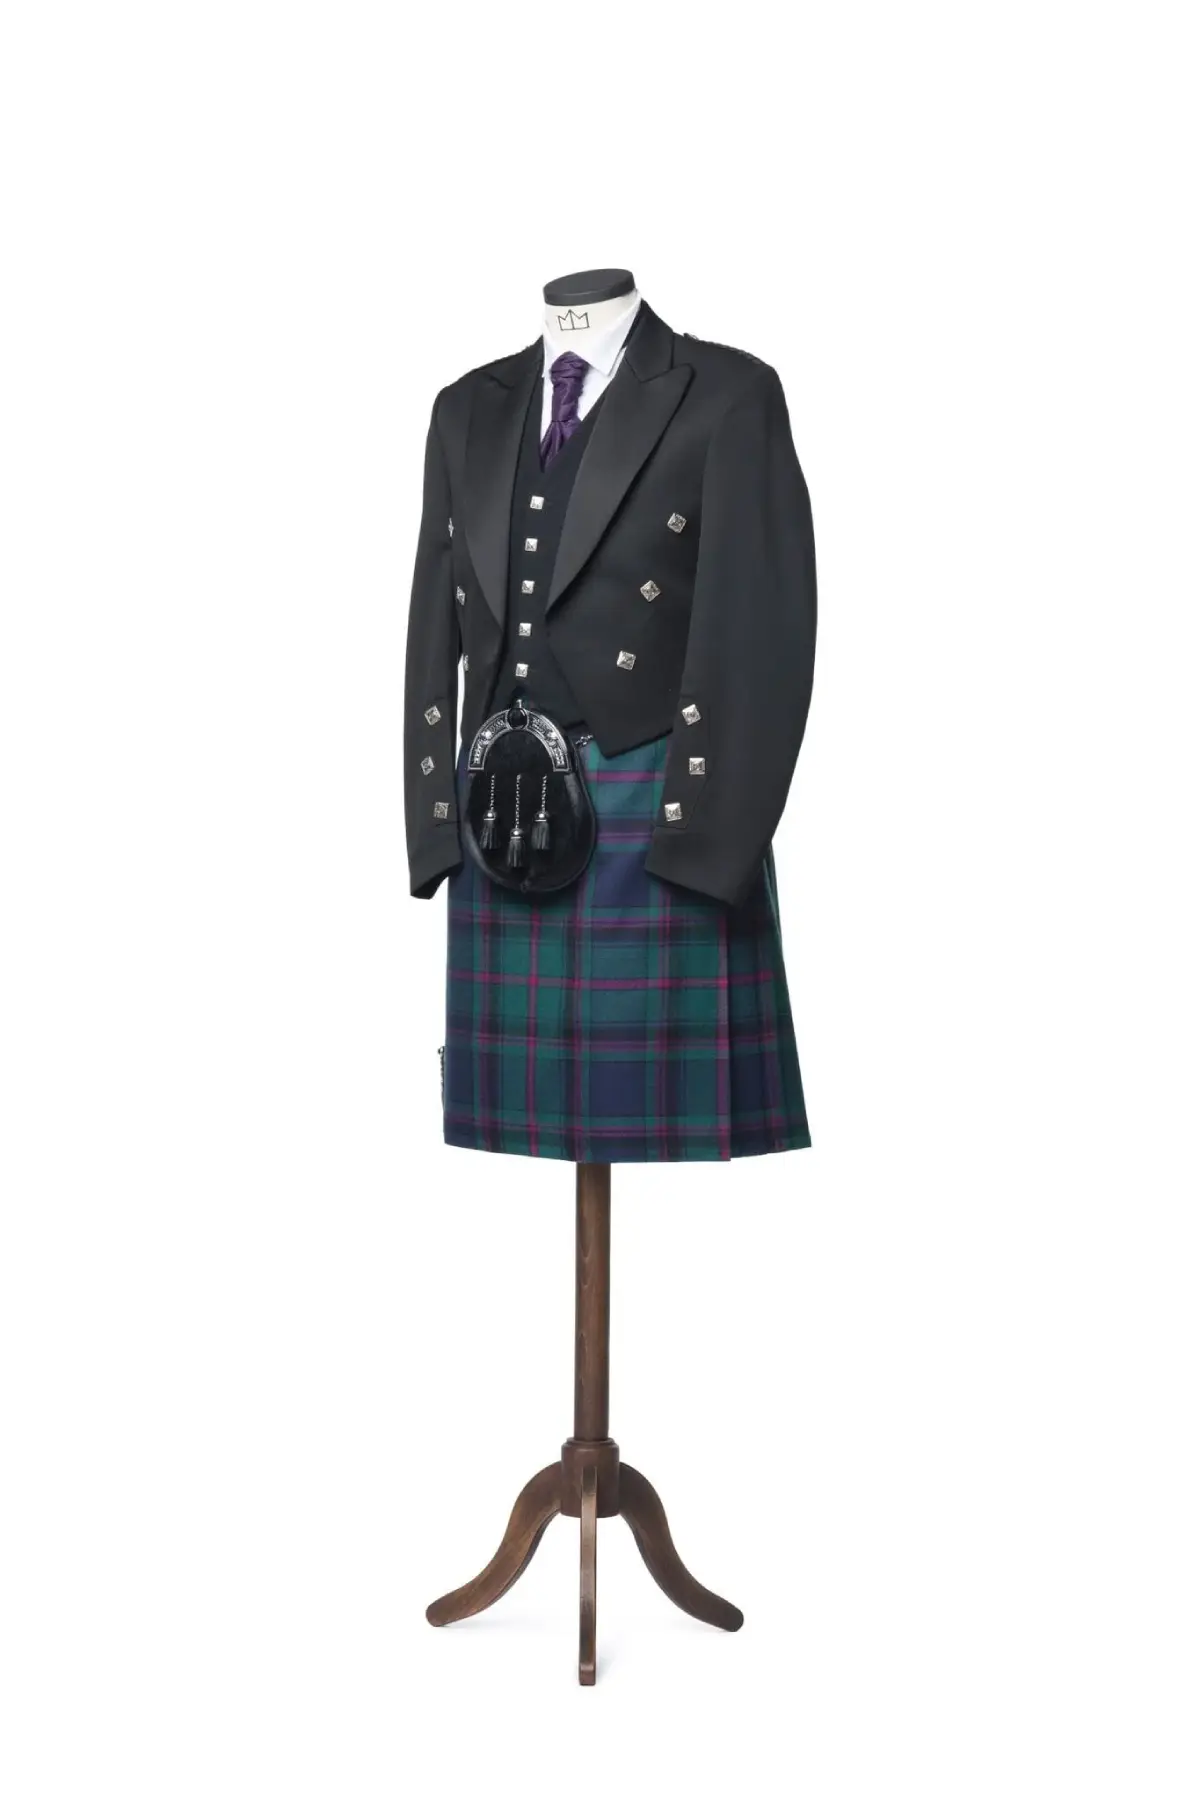 Prince-Charlie-Kilt-Outfit-with-5-button-vest2 (1)